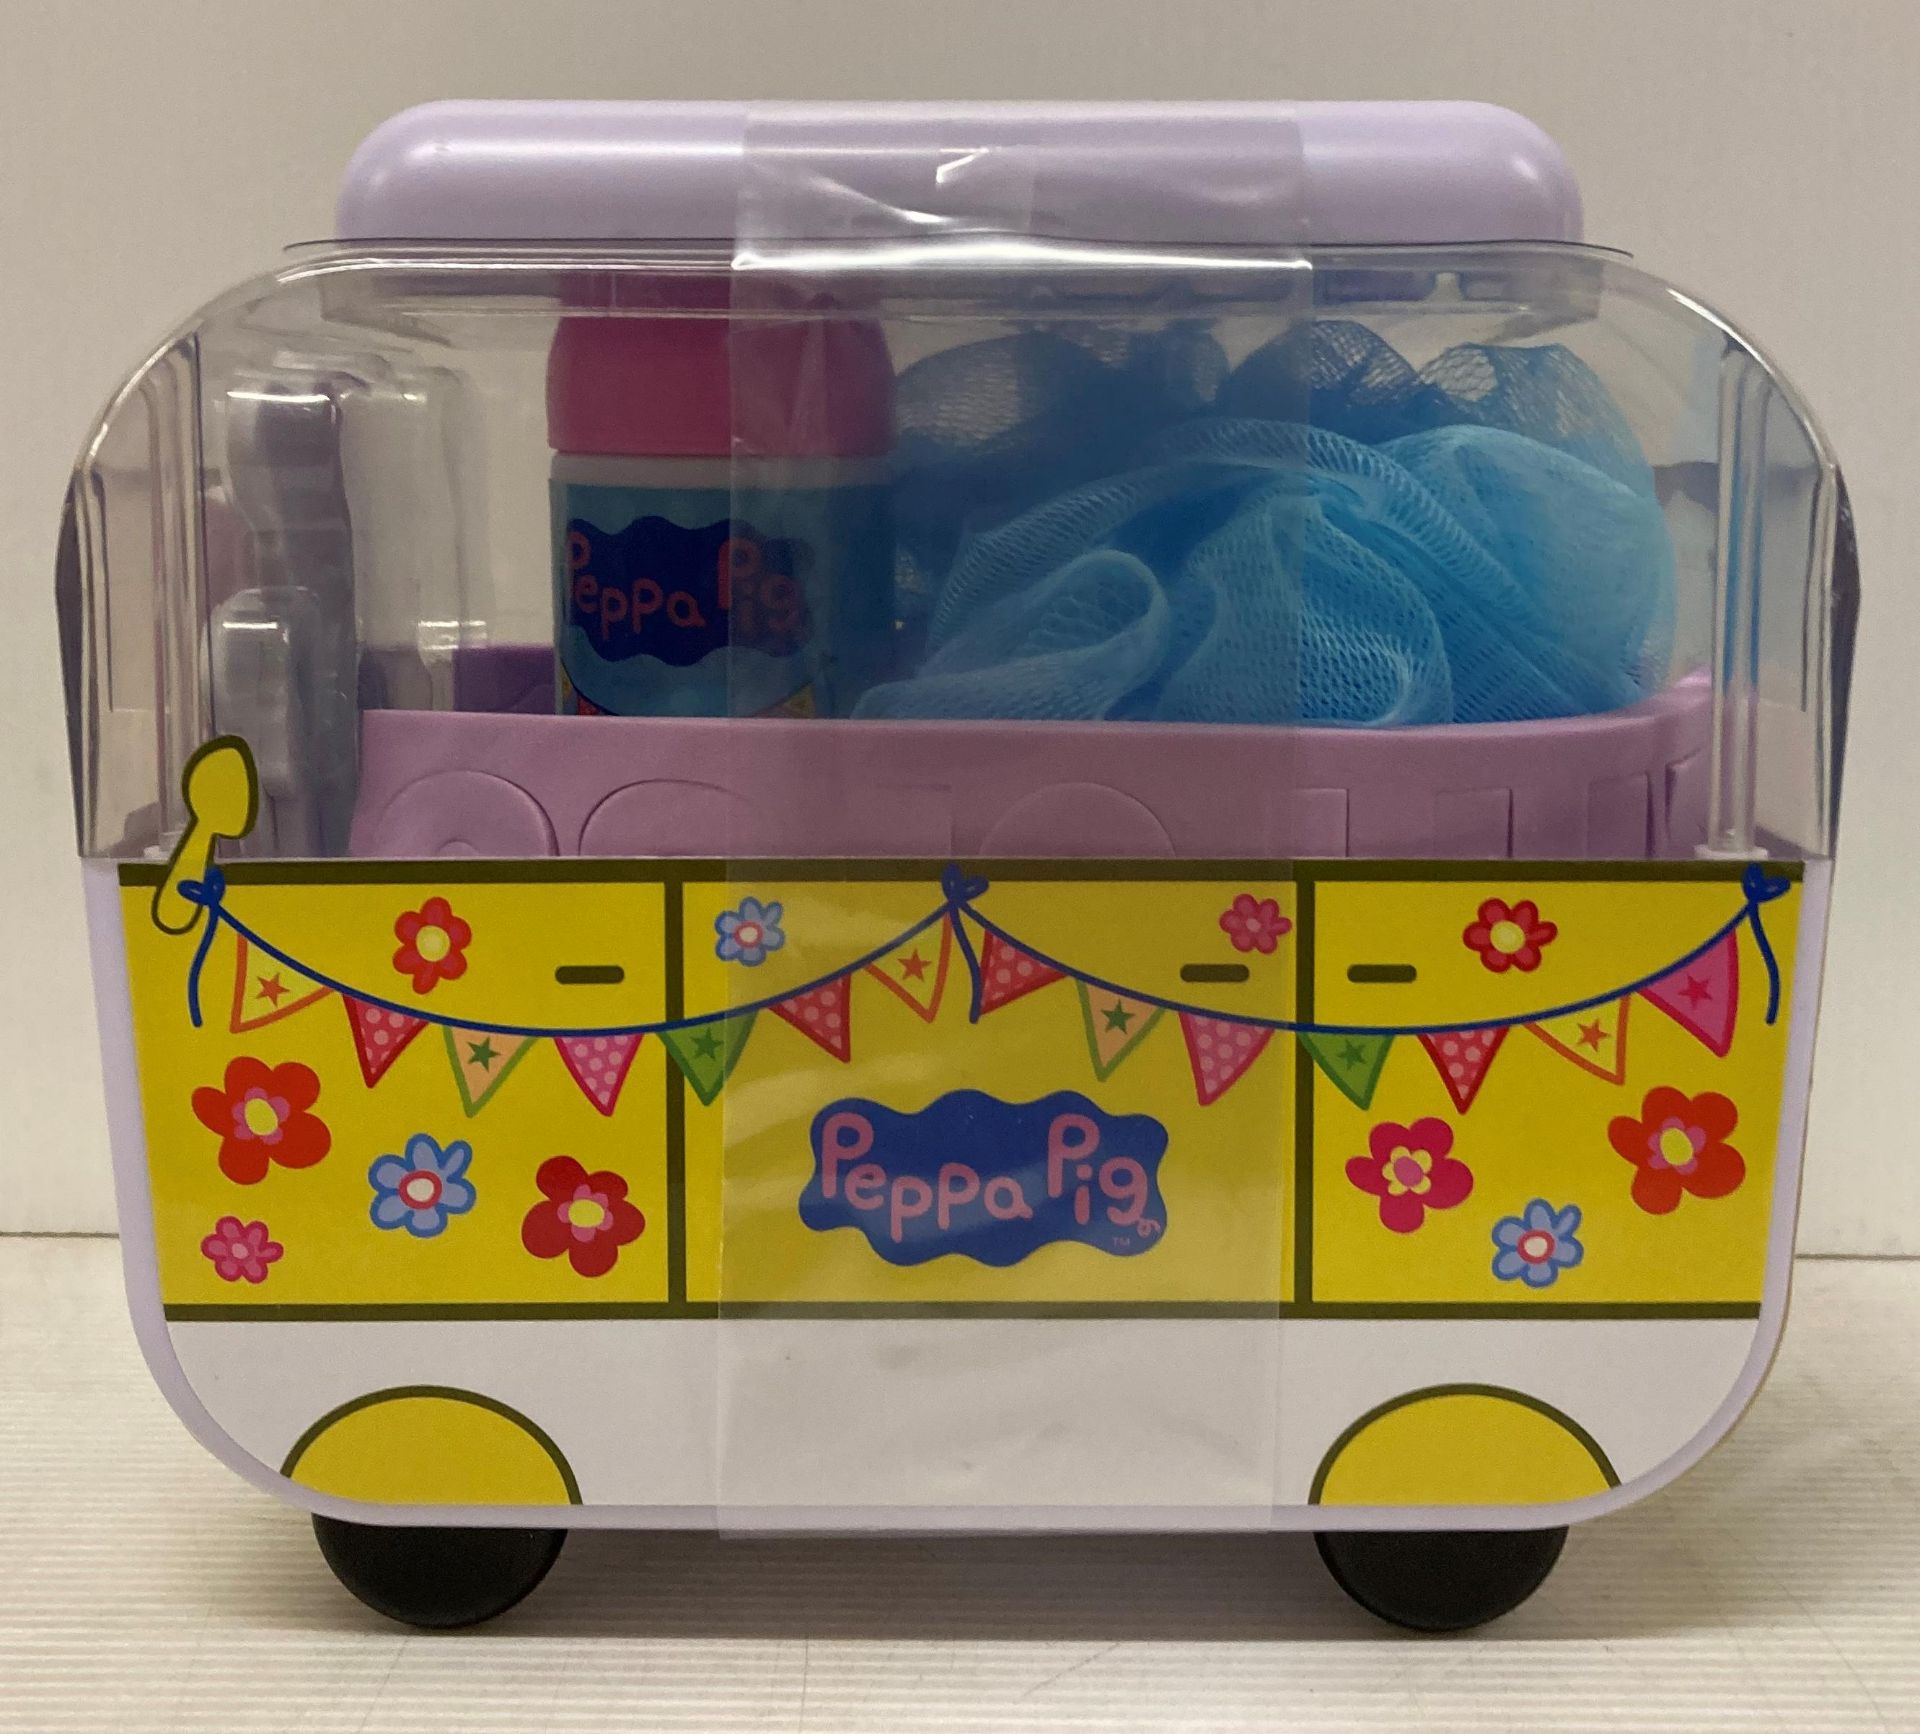 6 x Peppa Pig Campervan Bath Sets (with cut-out Peppa Pig characters, bath numbers,